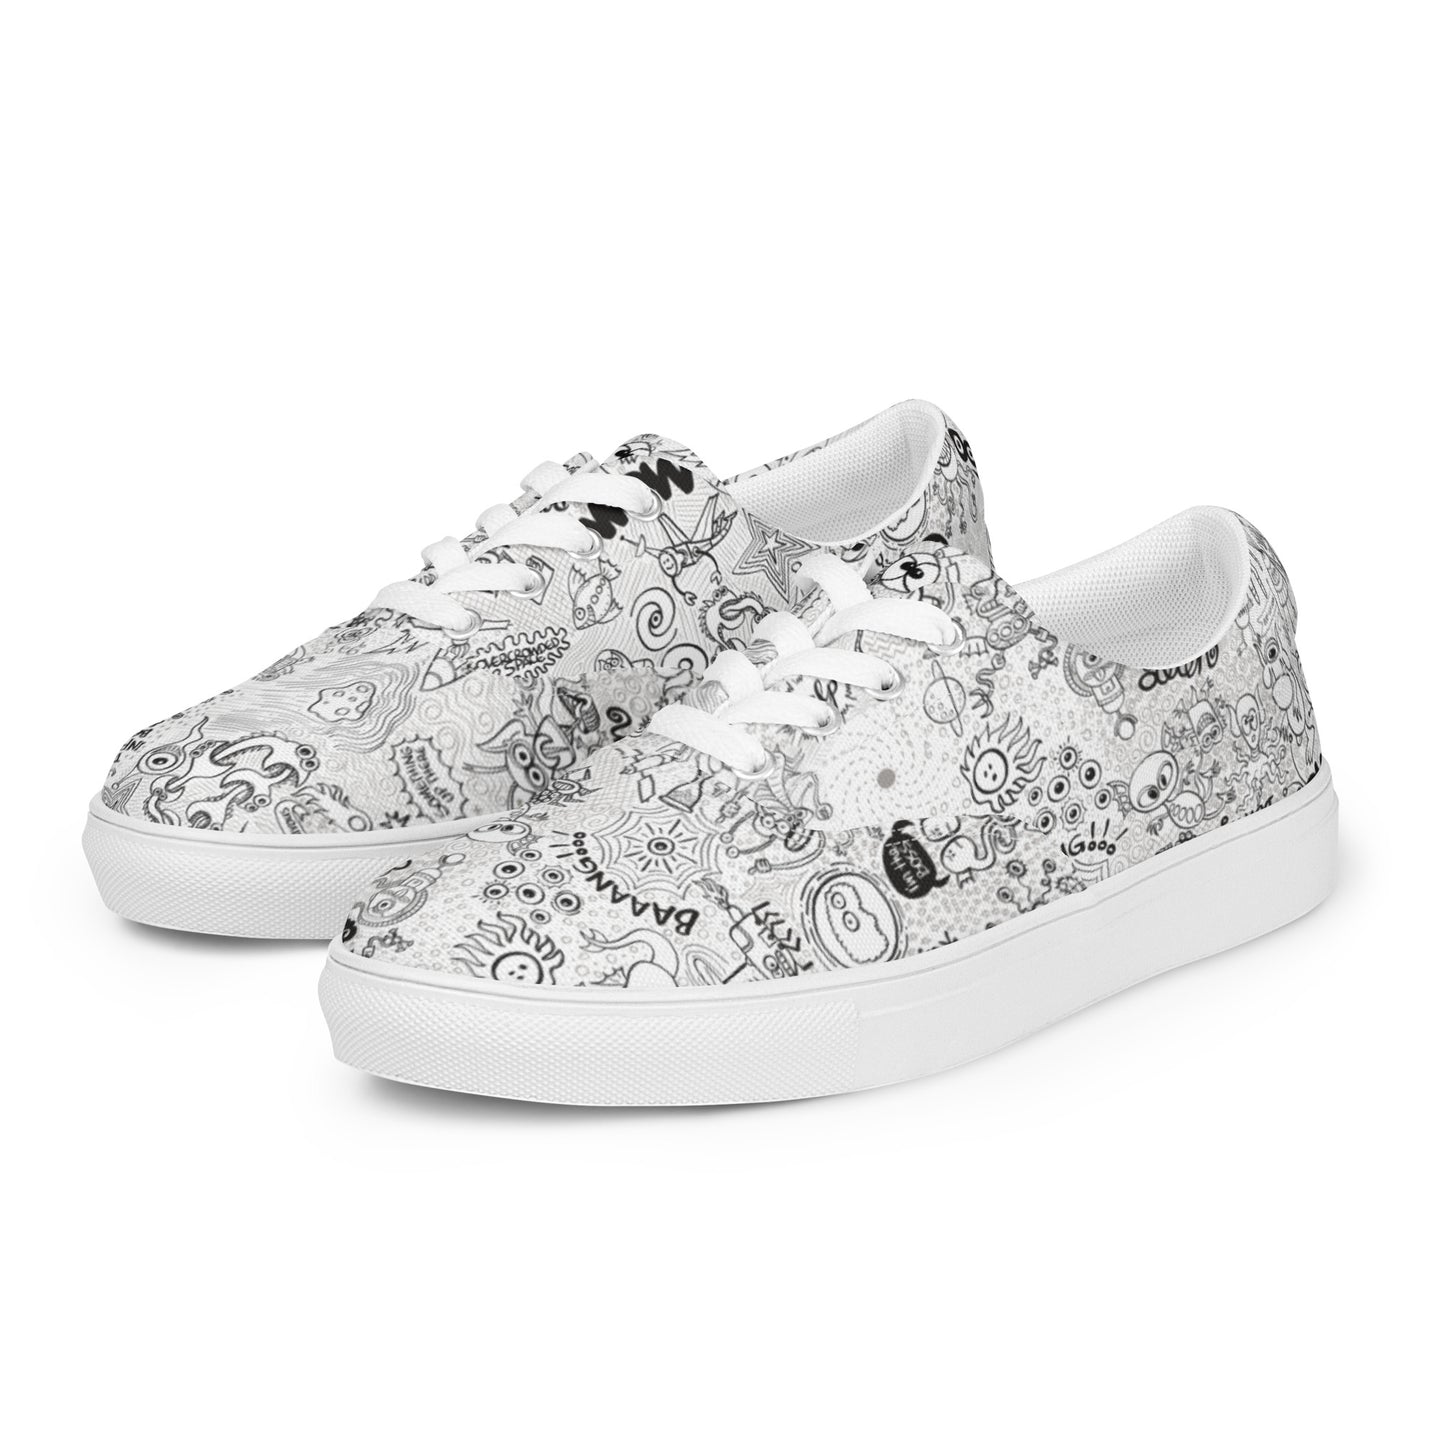 Celebrating the most comprehensive Doodle art of the universe Men’s lace-up canvas shoes. Overview